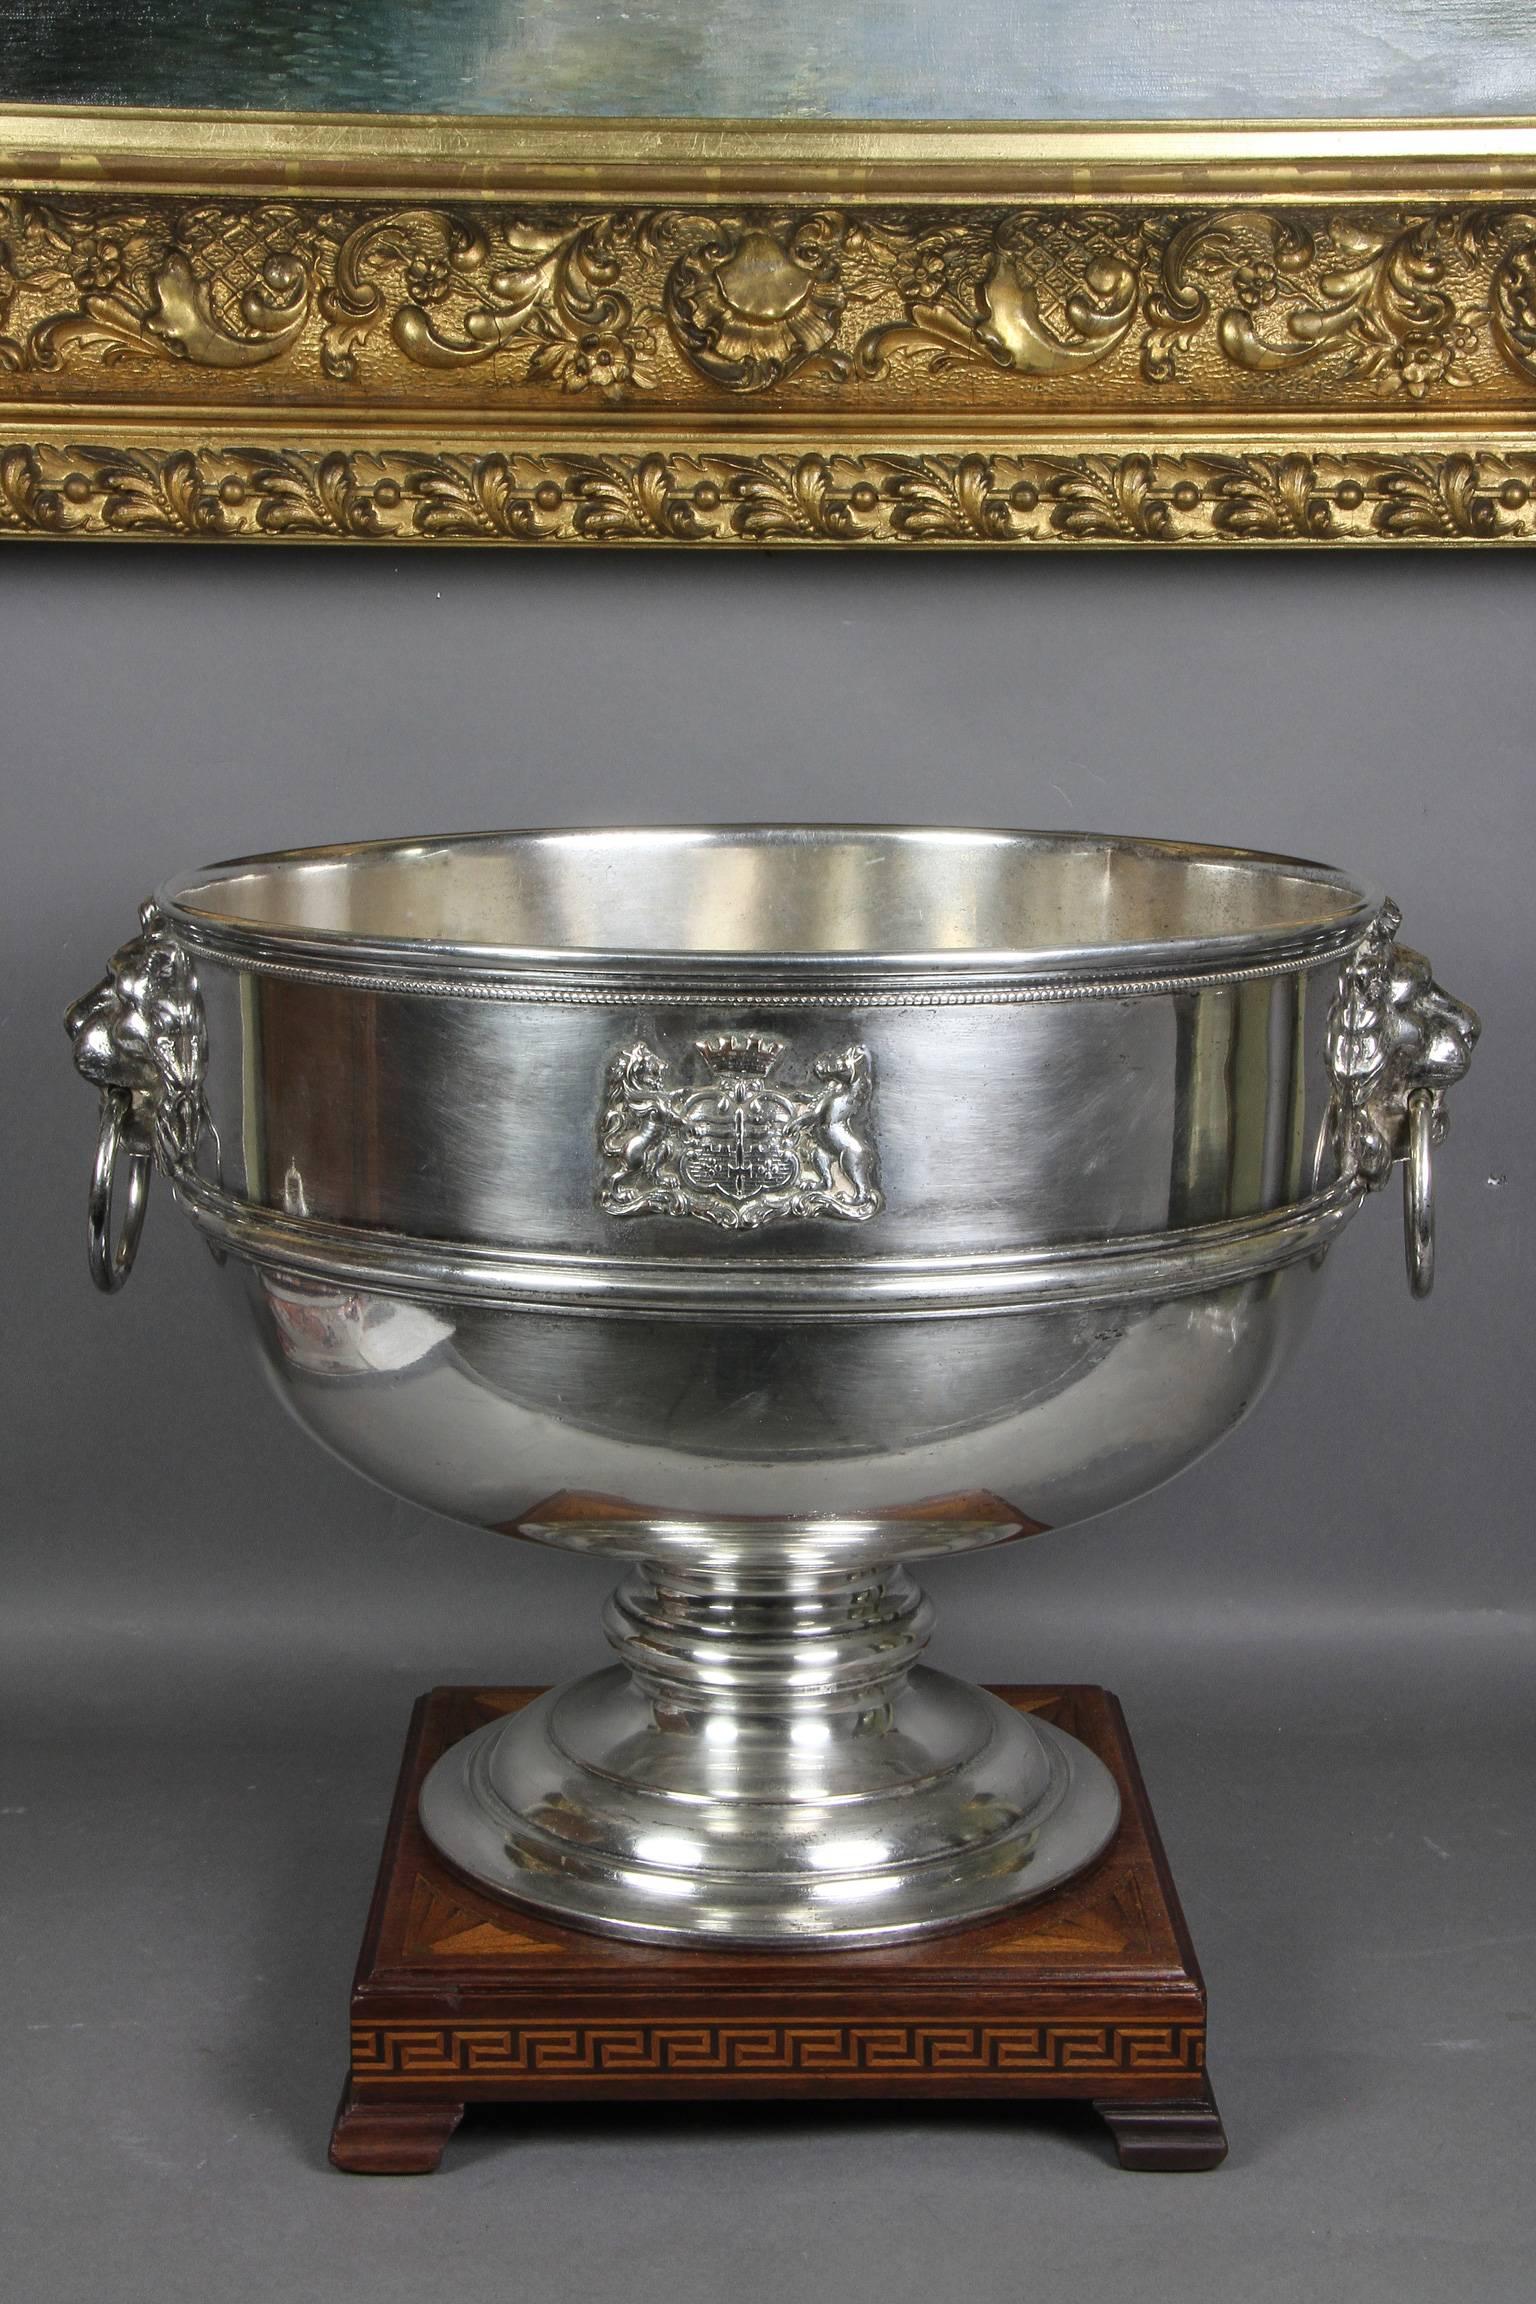 English Regency Silver Plated Footed Punch Bowl Bearing the Arms of the City of Bath